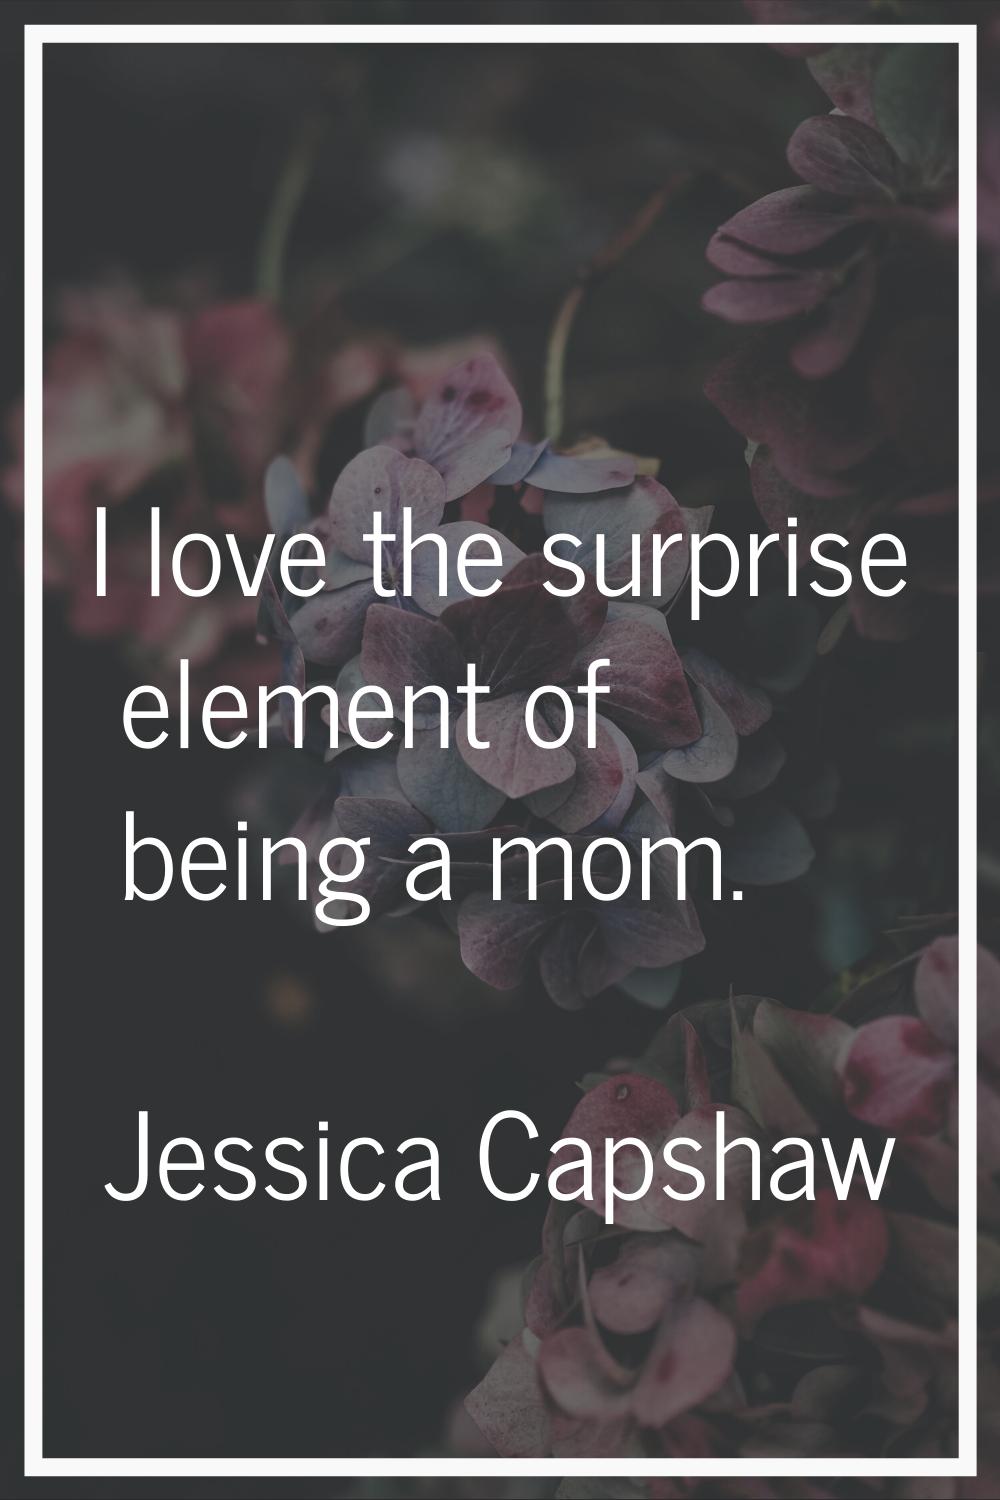 I love the surprise element of being a mom.